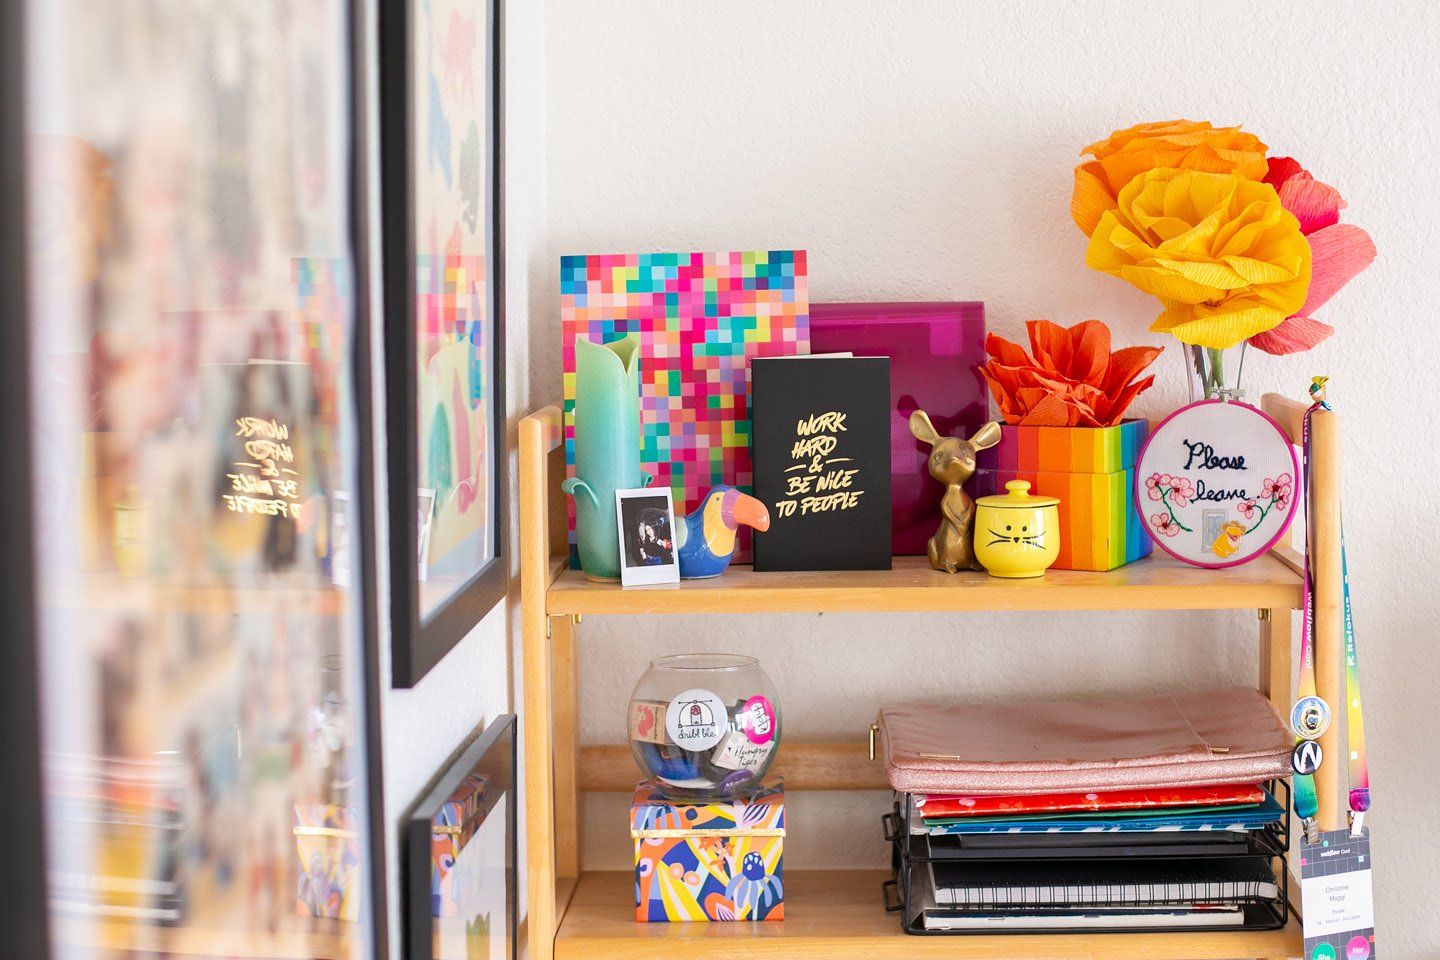 A view of the top part of a ladder bookshelf in a home office, adorned with colourful notebooks, postcards, paper flowers, candles, figurines, and photographs